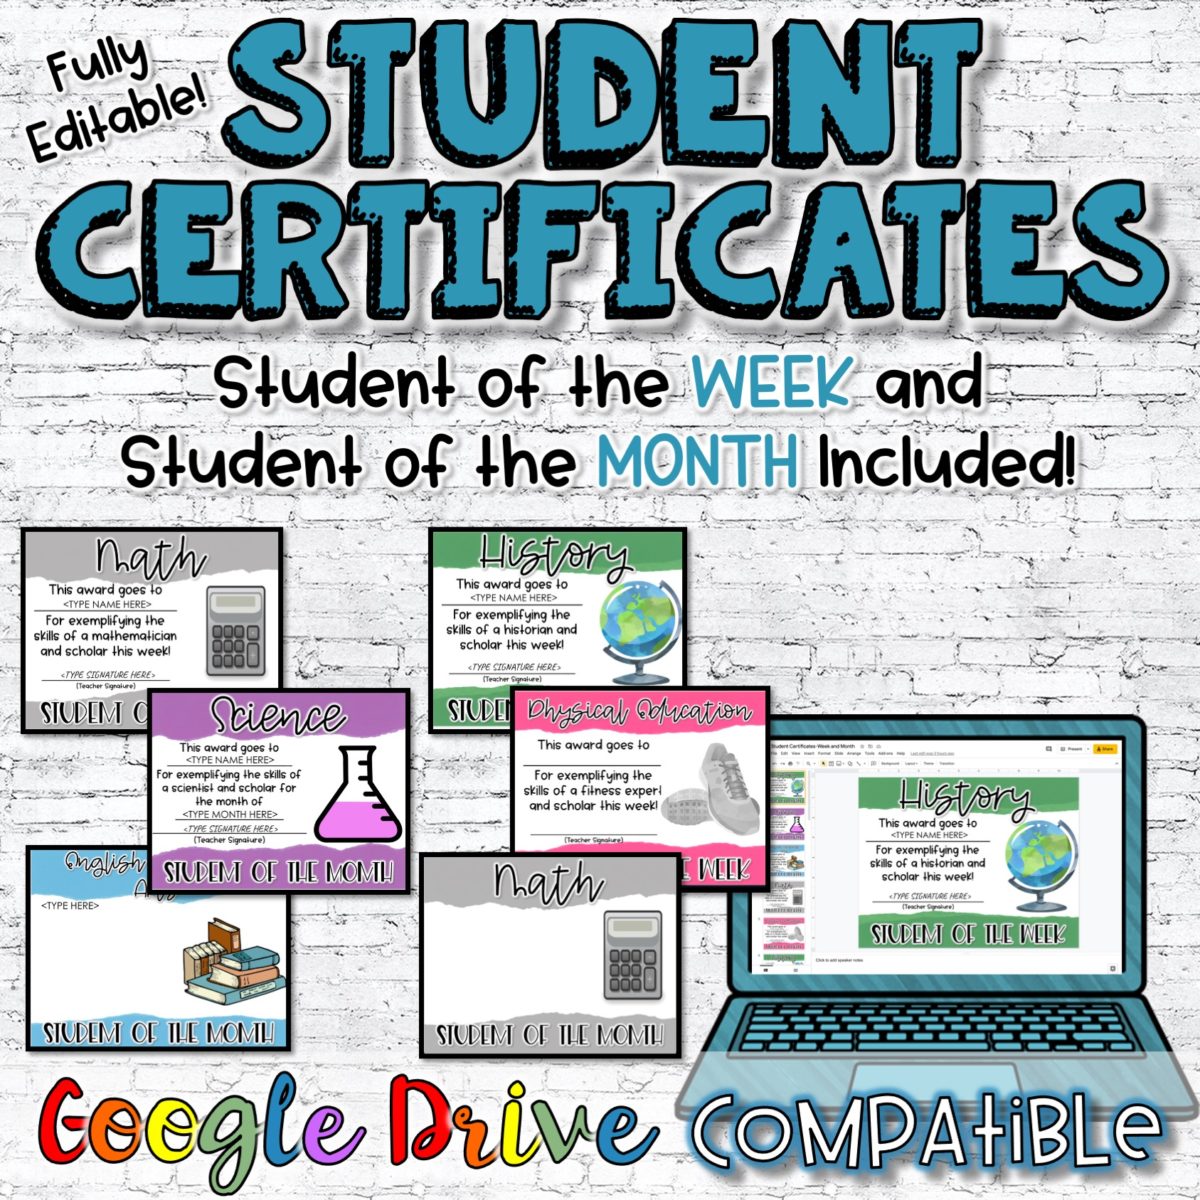 Text says Student Certificates for student of the week and month and is totlaly editable. The image sits on top of a white brick wall.